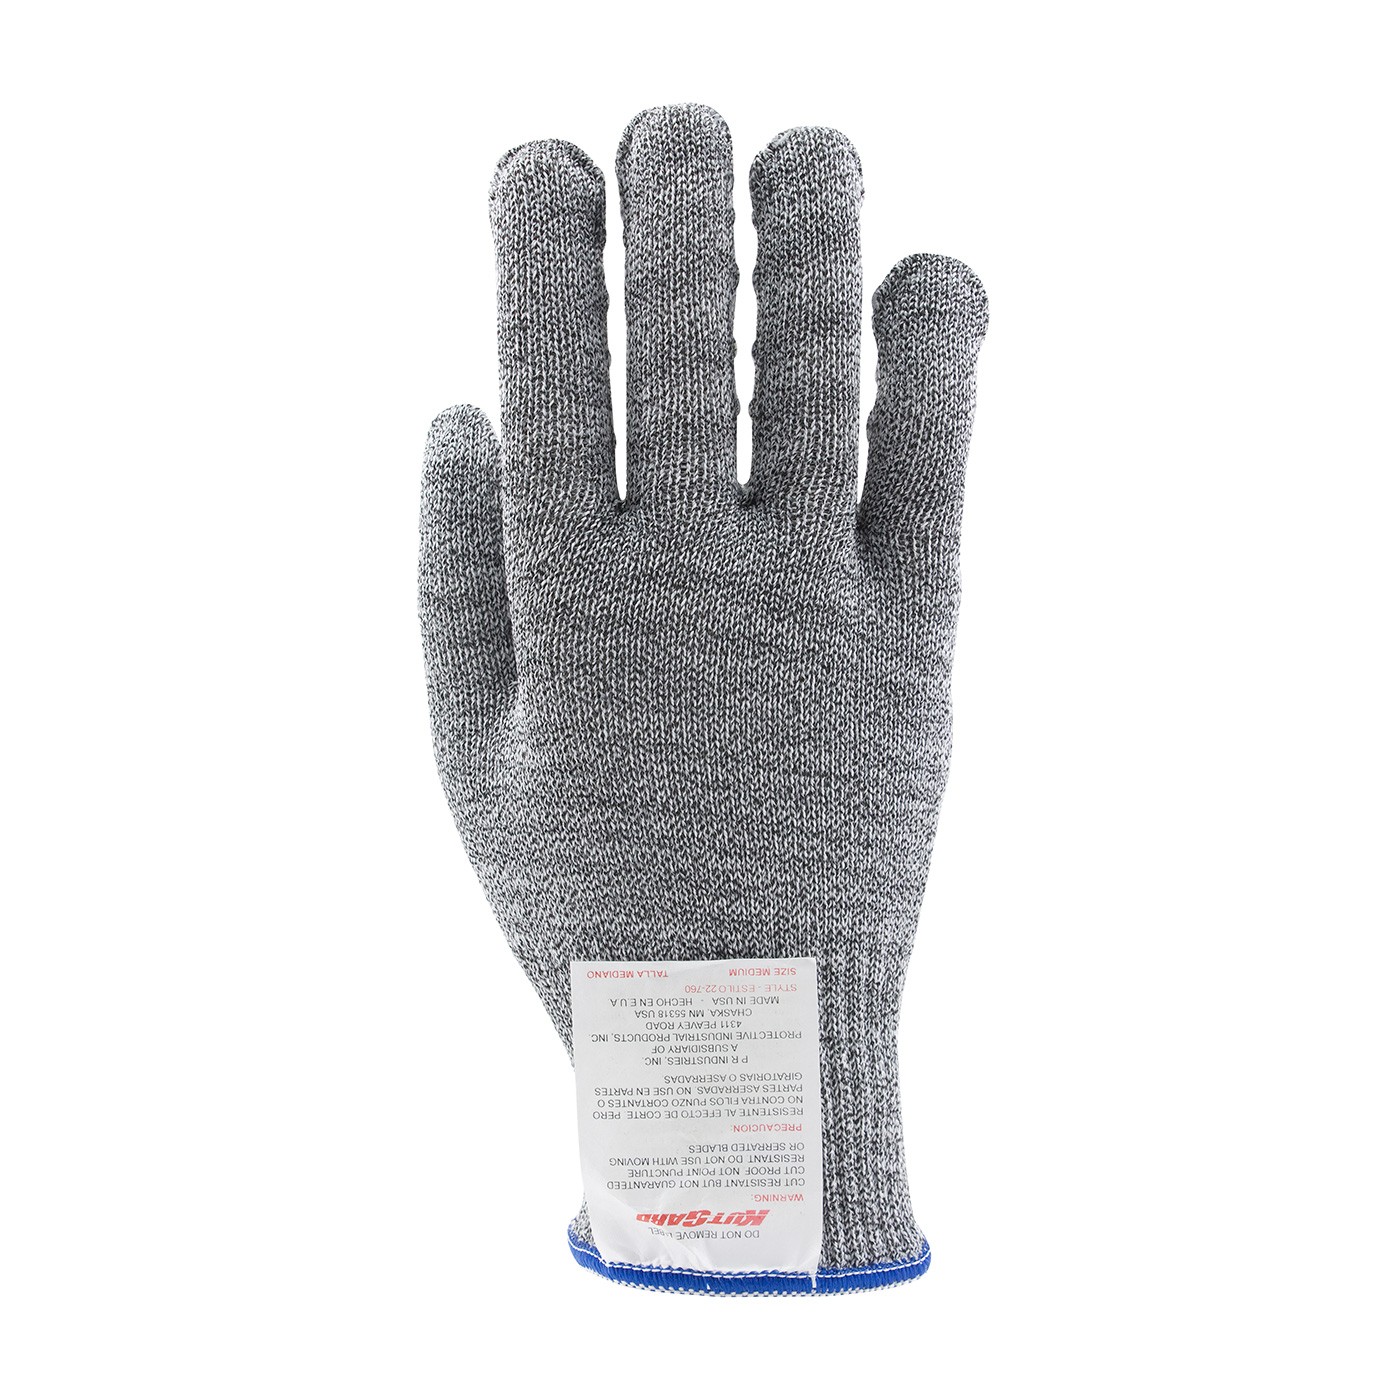 Kut Gard® Seamless Knit Dyneema® Blended Glove with Silagrip Coating on Palm - Medium Weight  (#22-761)